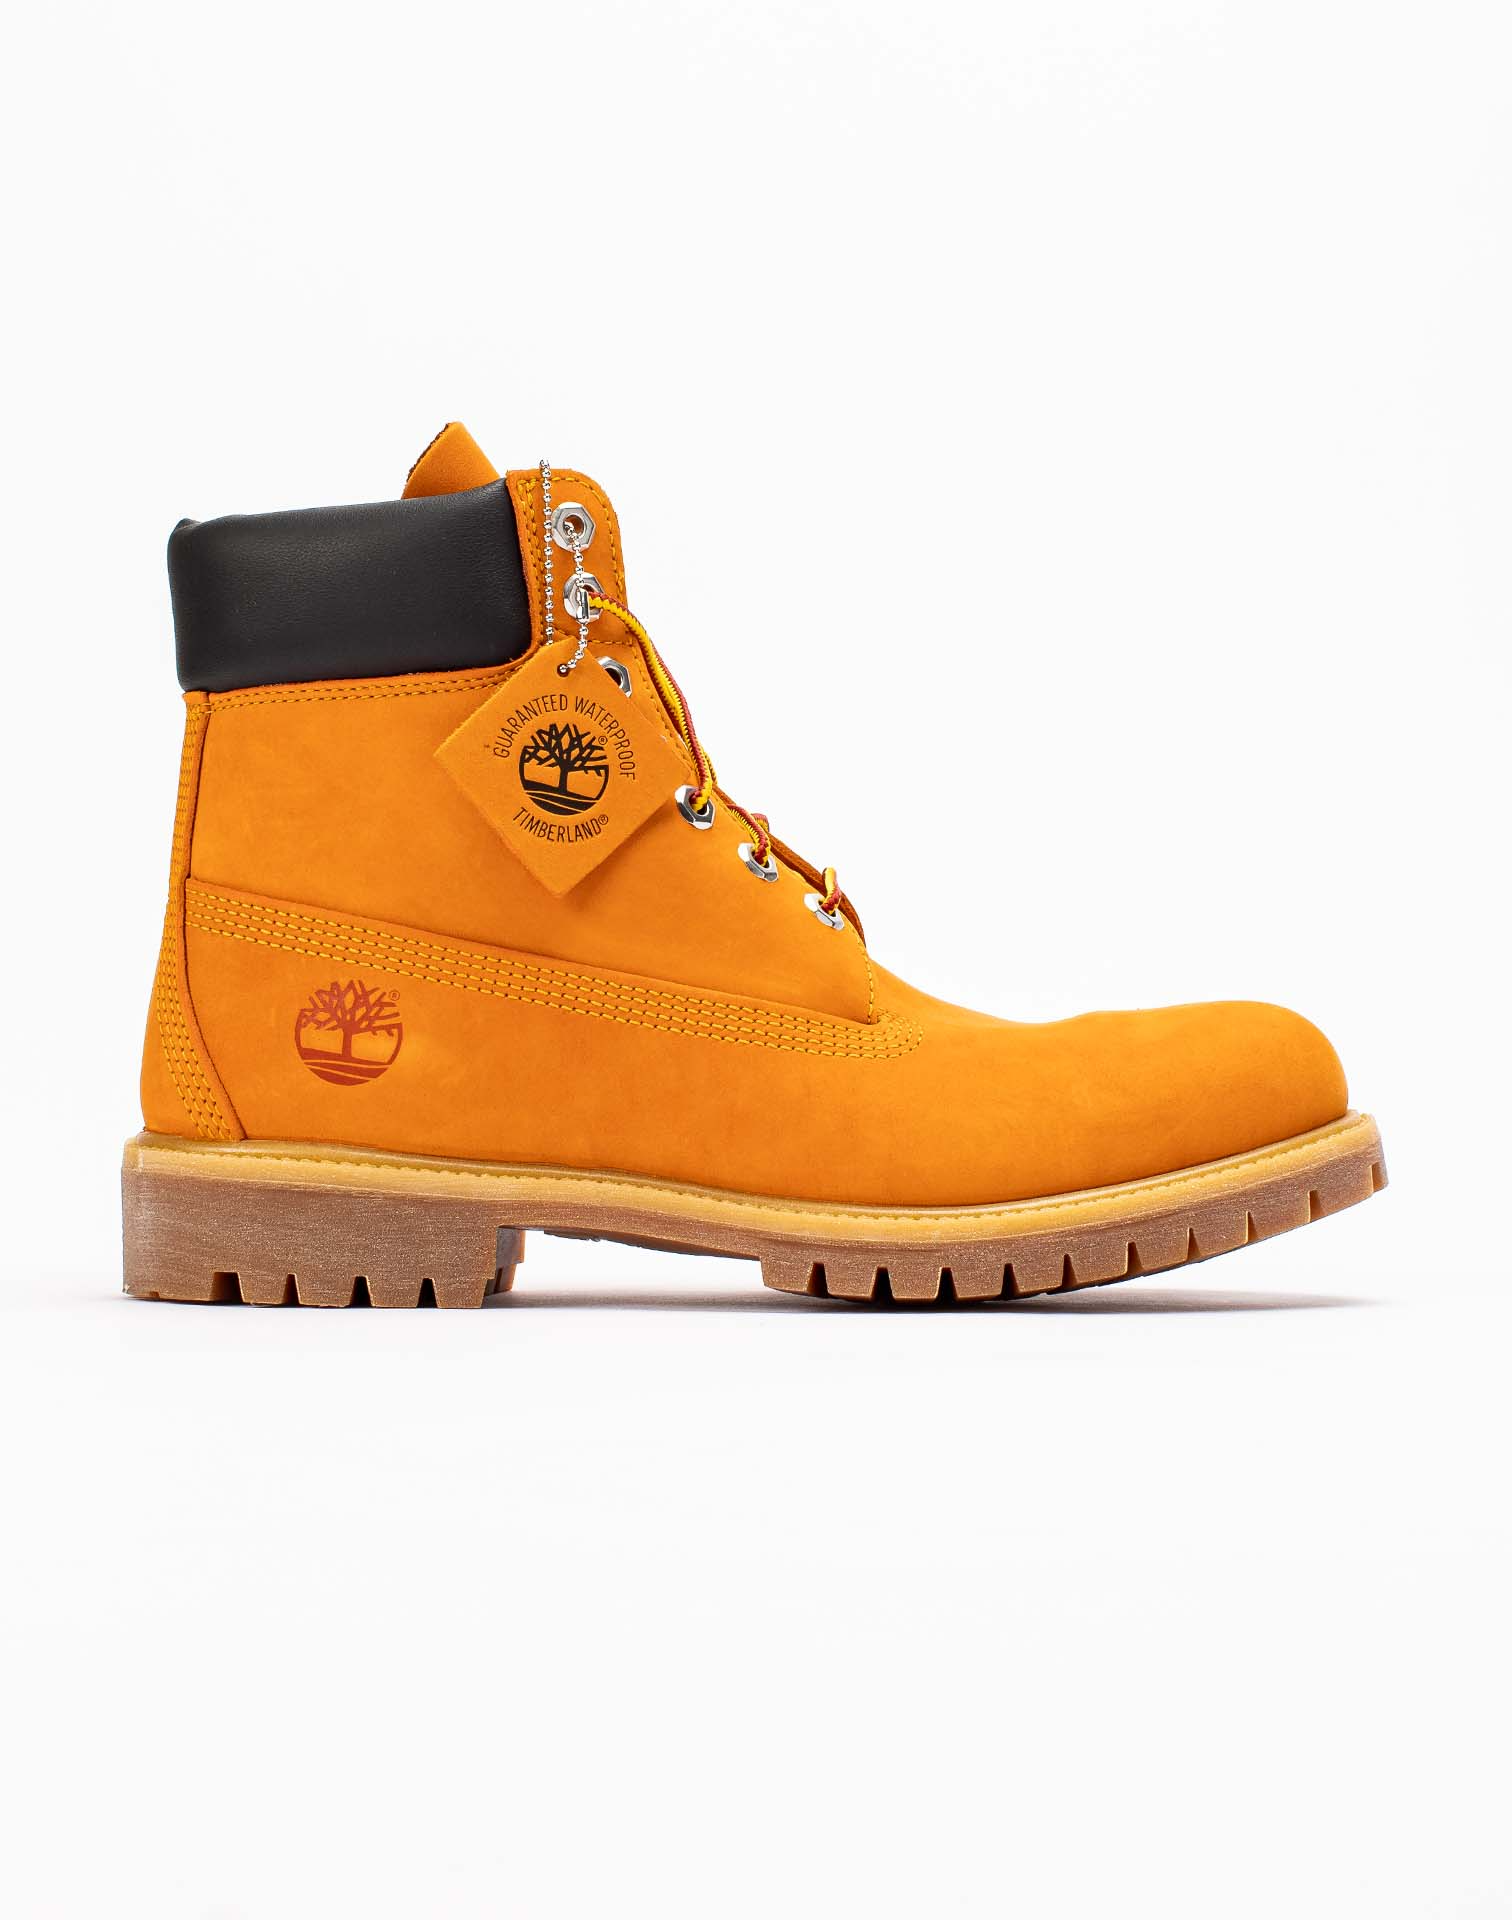 Now Available: Timberland 6-inch Premium Boot 